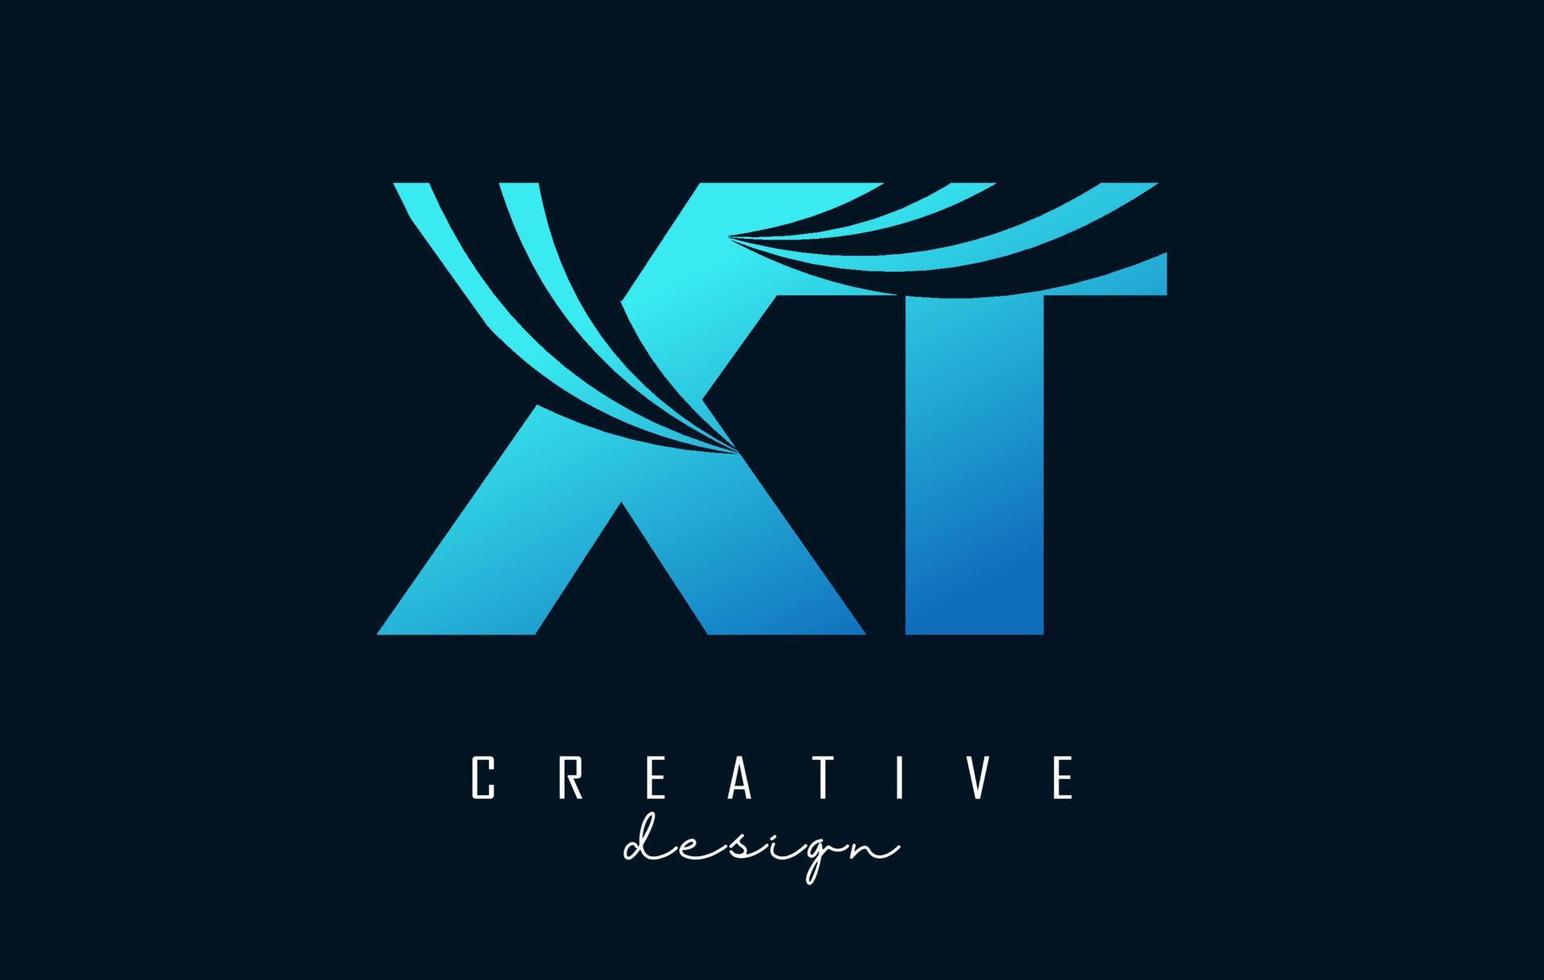 Creative blue letters XT x t logo with leading lines and road concept design. Letters with geometric design. vector